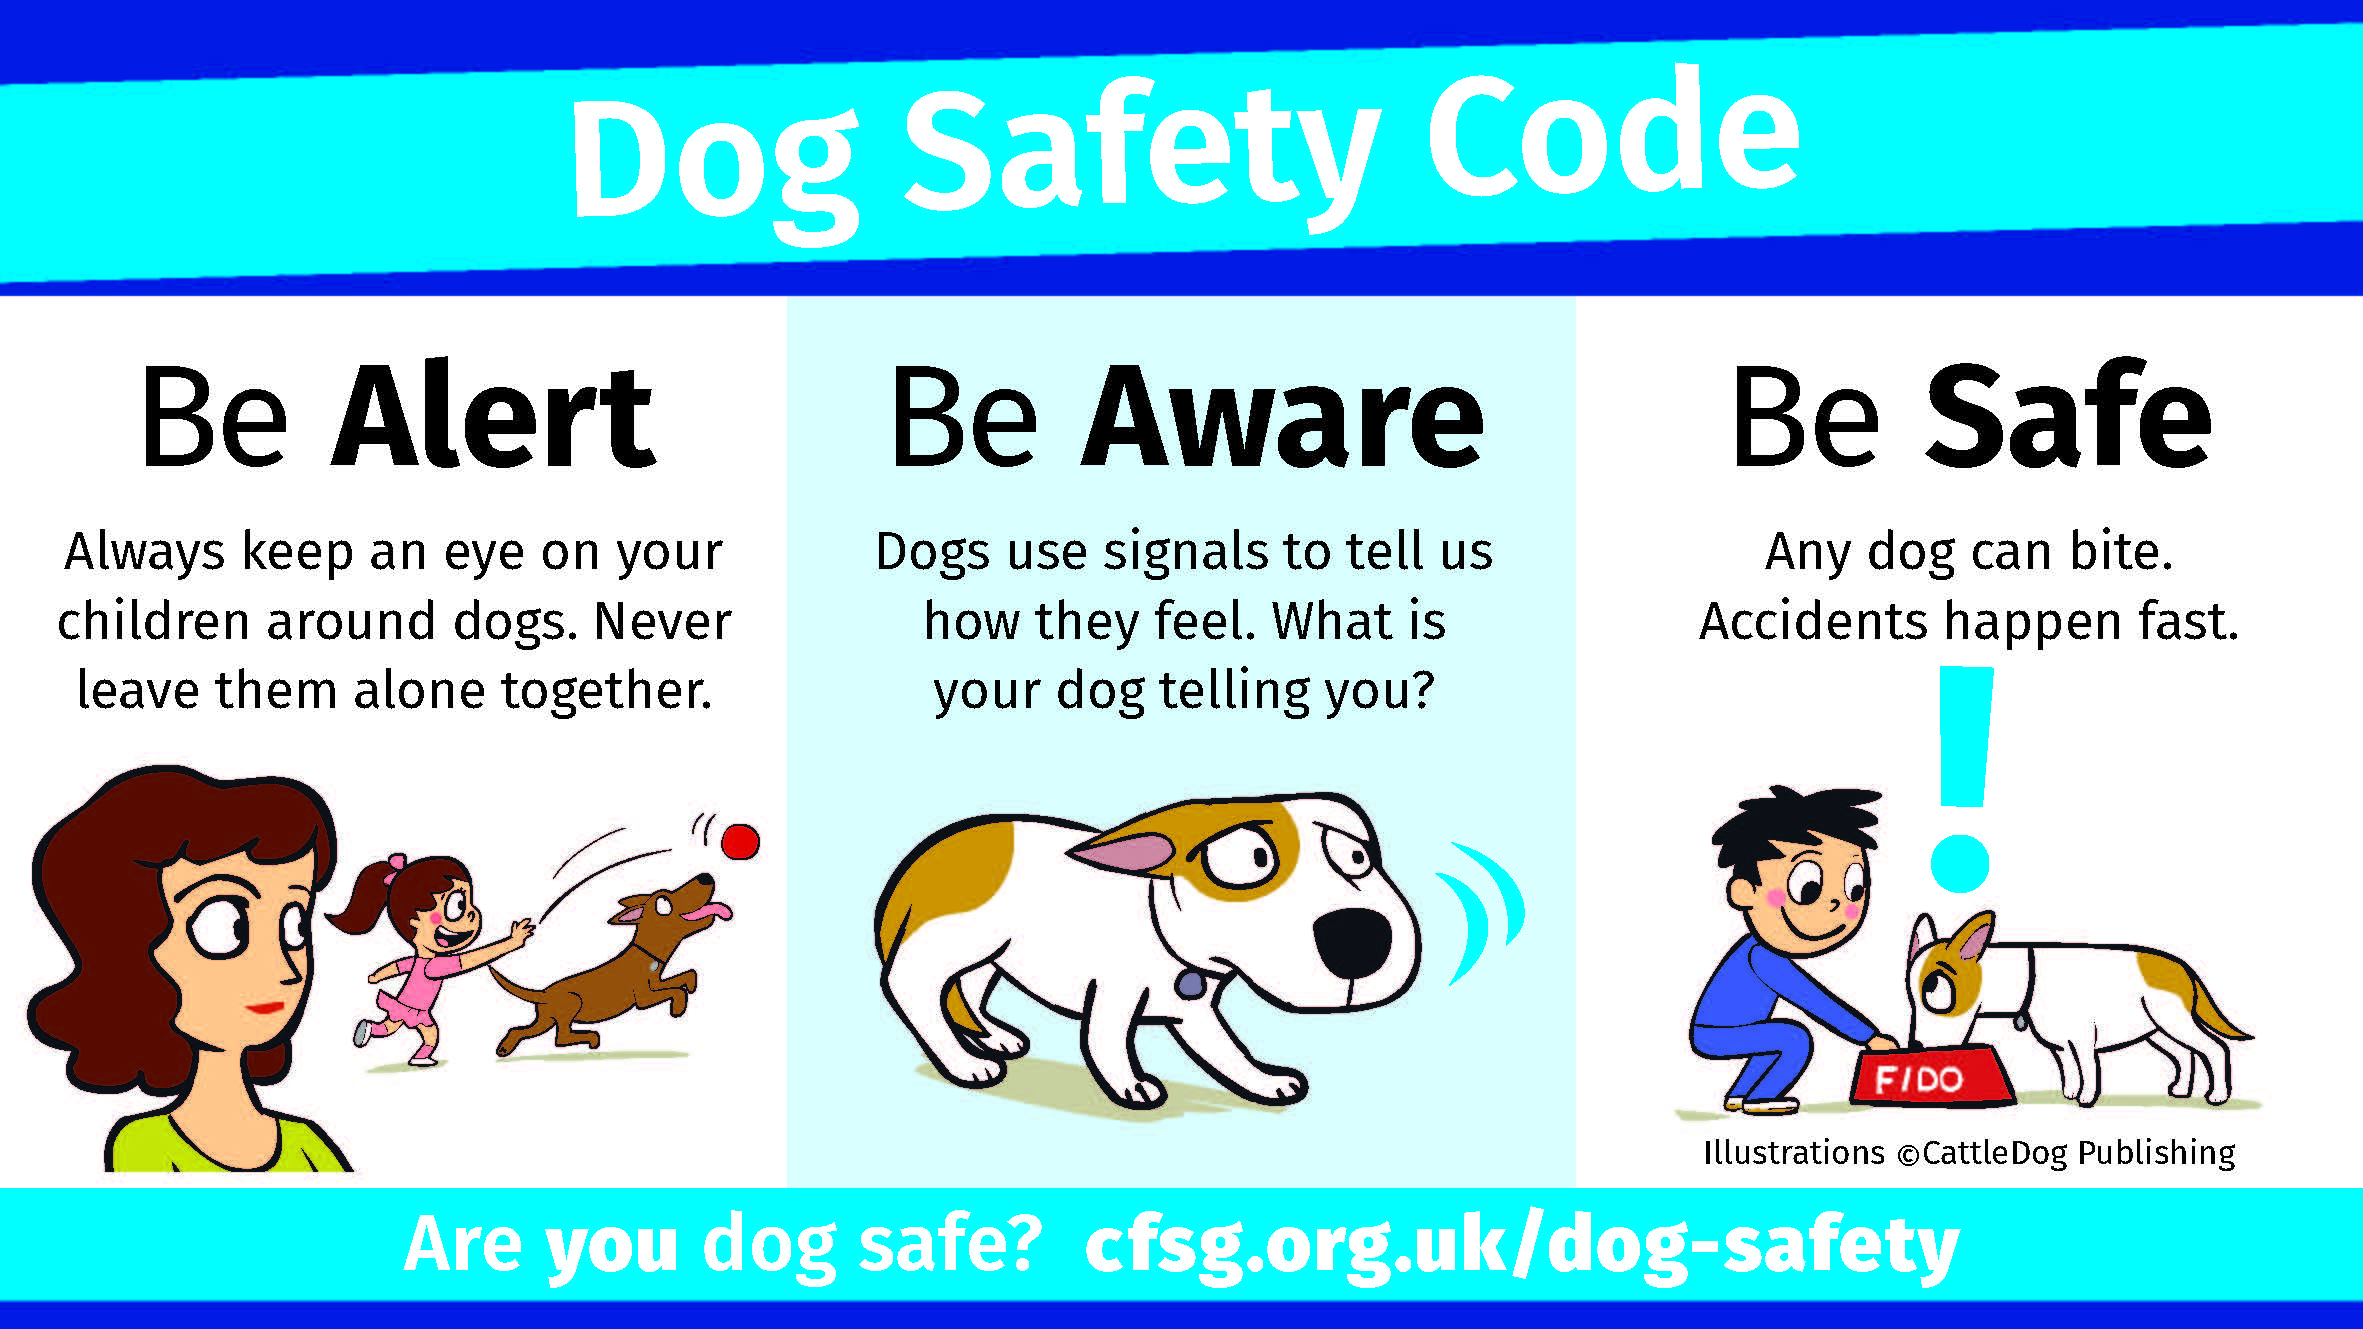 Are you concerned for the safety of your dog?